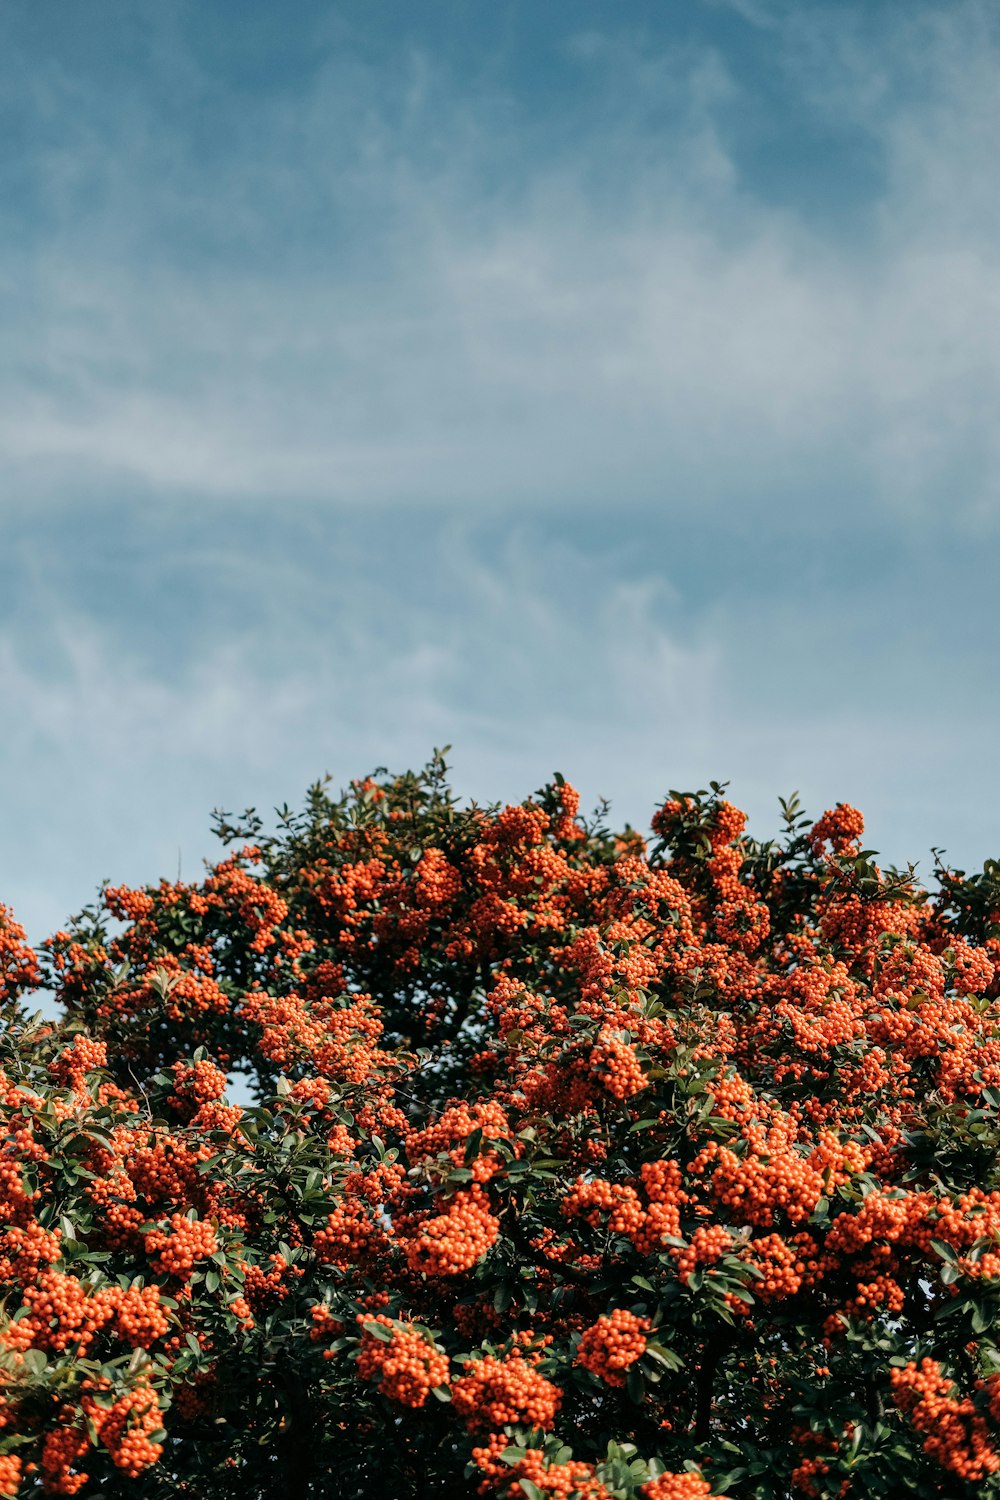 a tree with orange flowers in the foreground and a blue sky in the background